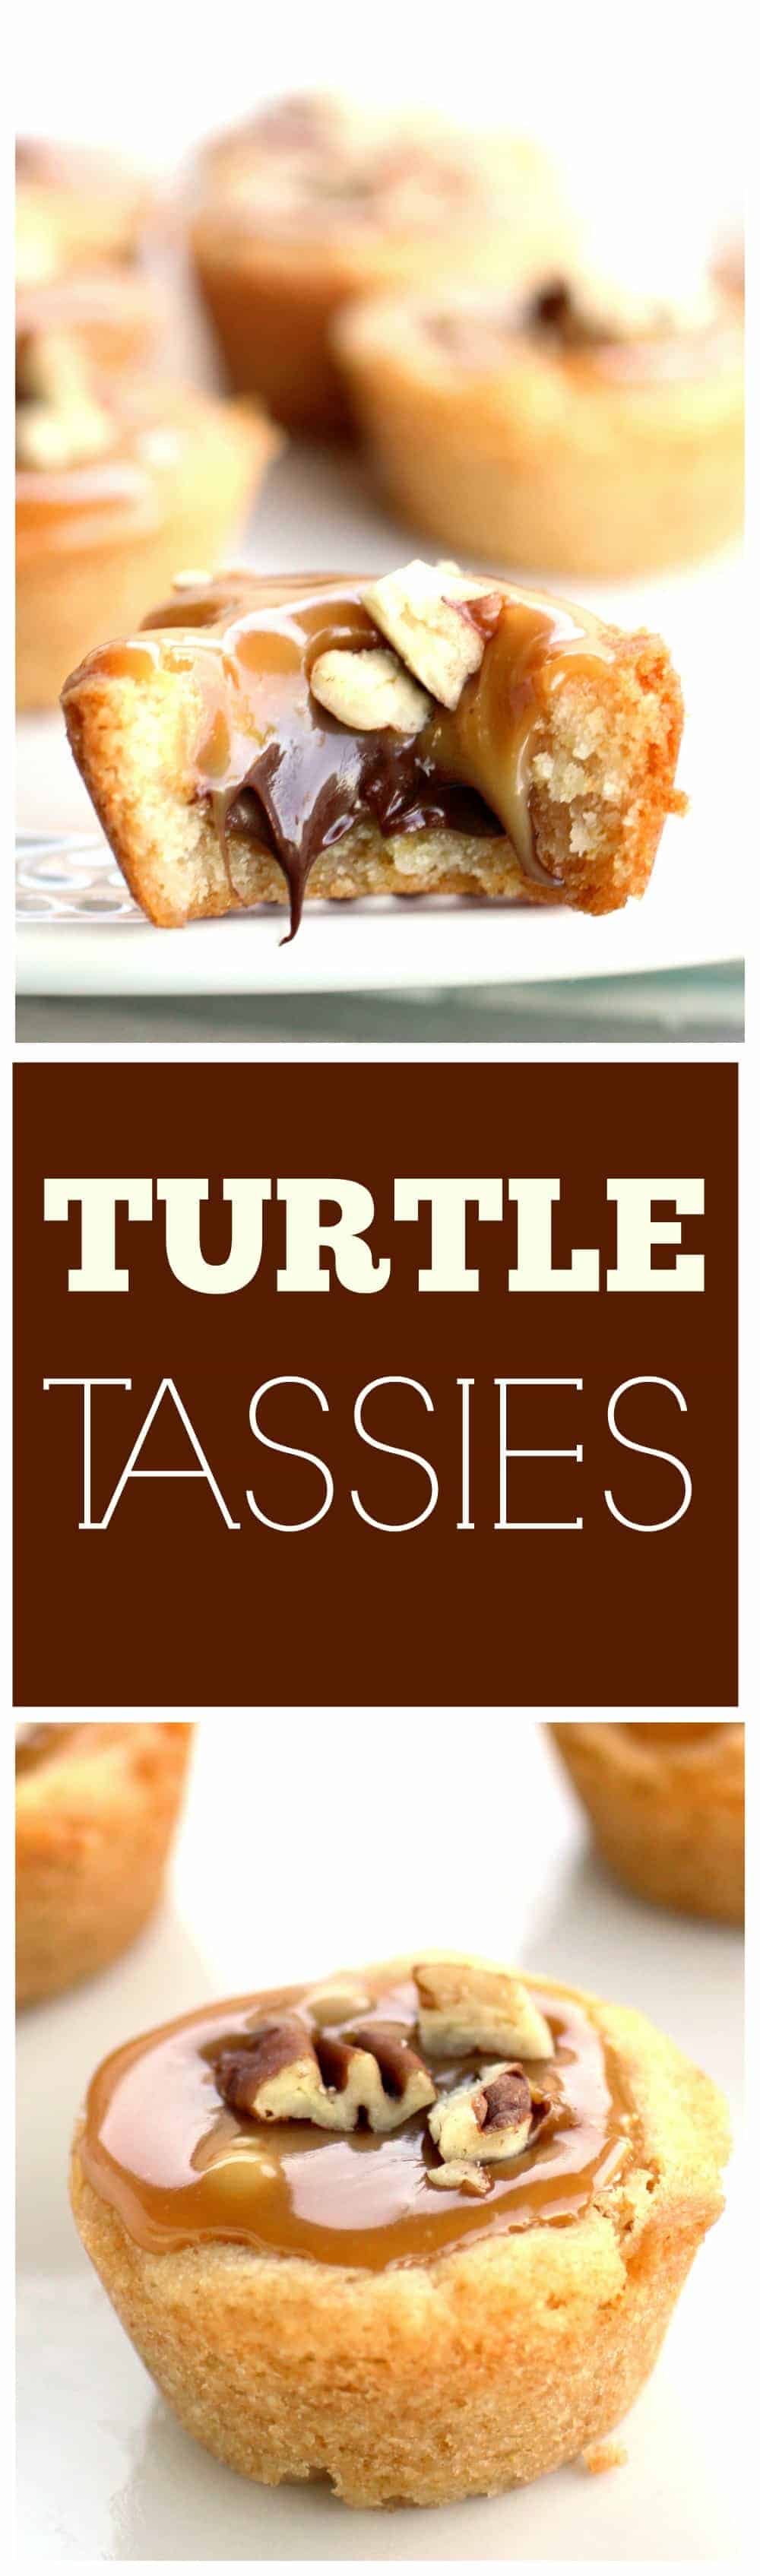 Turtle Tassies - Caramel, chocolate, and nuts in a sugar cookie cup. the-girl-who-ate-everything.com